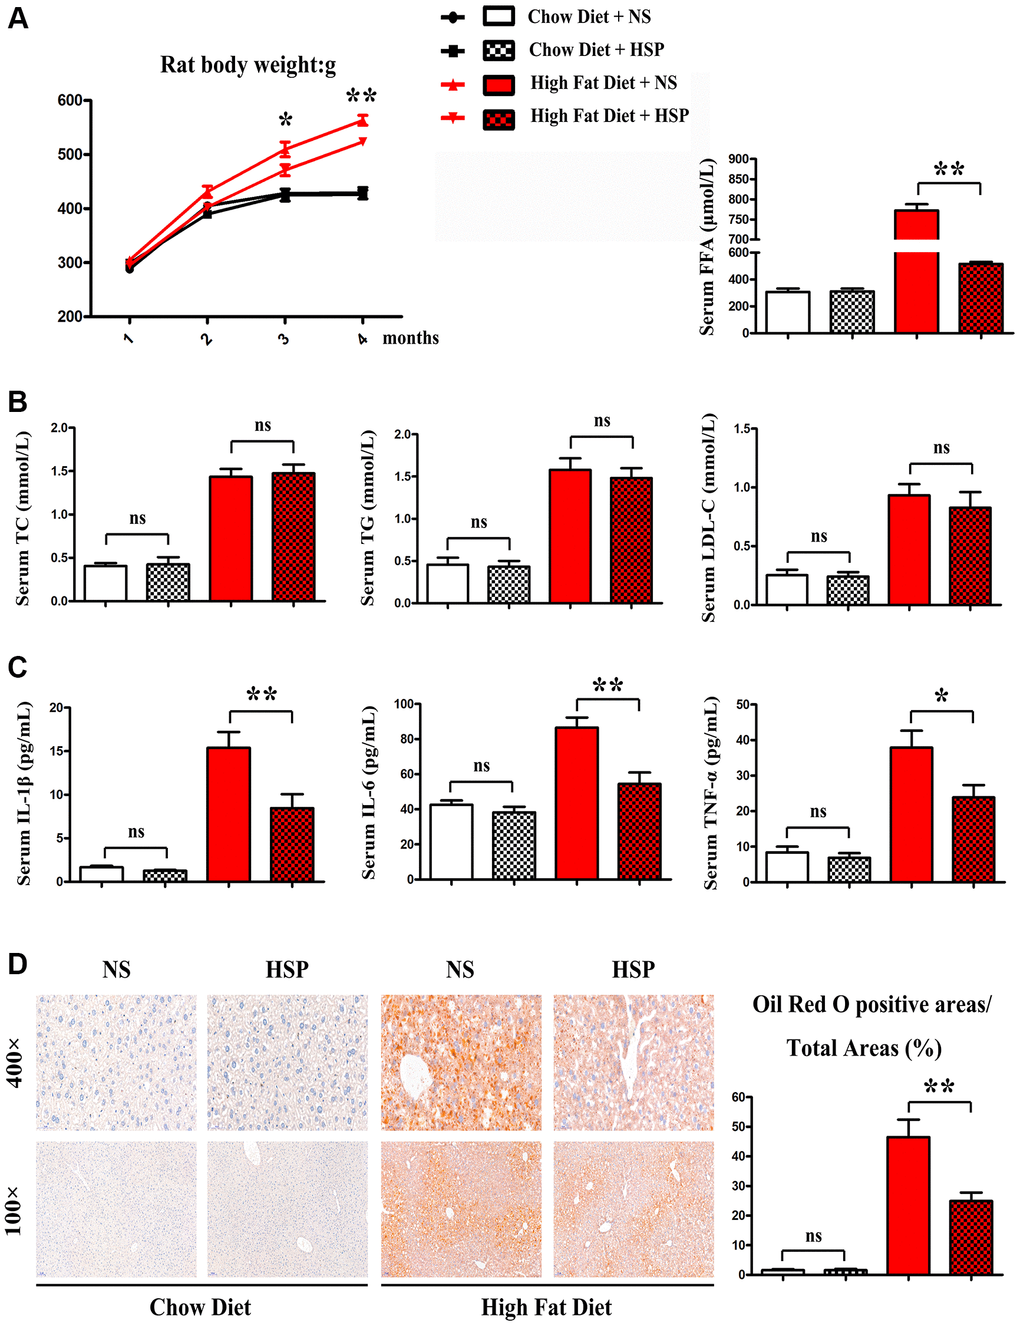 HSP suppressed HFD-induced body weight gain and hepatic steatosis but not serum lipid profile. SD rats were fed with CD or HFD for 4 months and were randomly divided into CD + NS group, CD + HSP group, HFD + NS group, and HFD + HSP group. (A) The body weight of the rat was evaluated. Data were presented as mean ± SEM. **P B) The levels of serum TC, TG, and LDL, FFA were examined (C) the levels of serum IL-1β, IL-6, TNF-α. Data were presented as mean ± SEM. (D) Histological analysis of hepatic steatosis stained with Oil Red O staining.